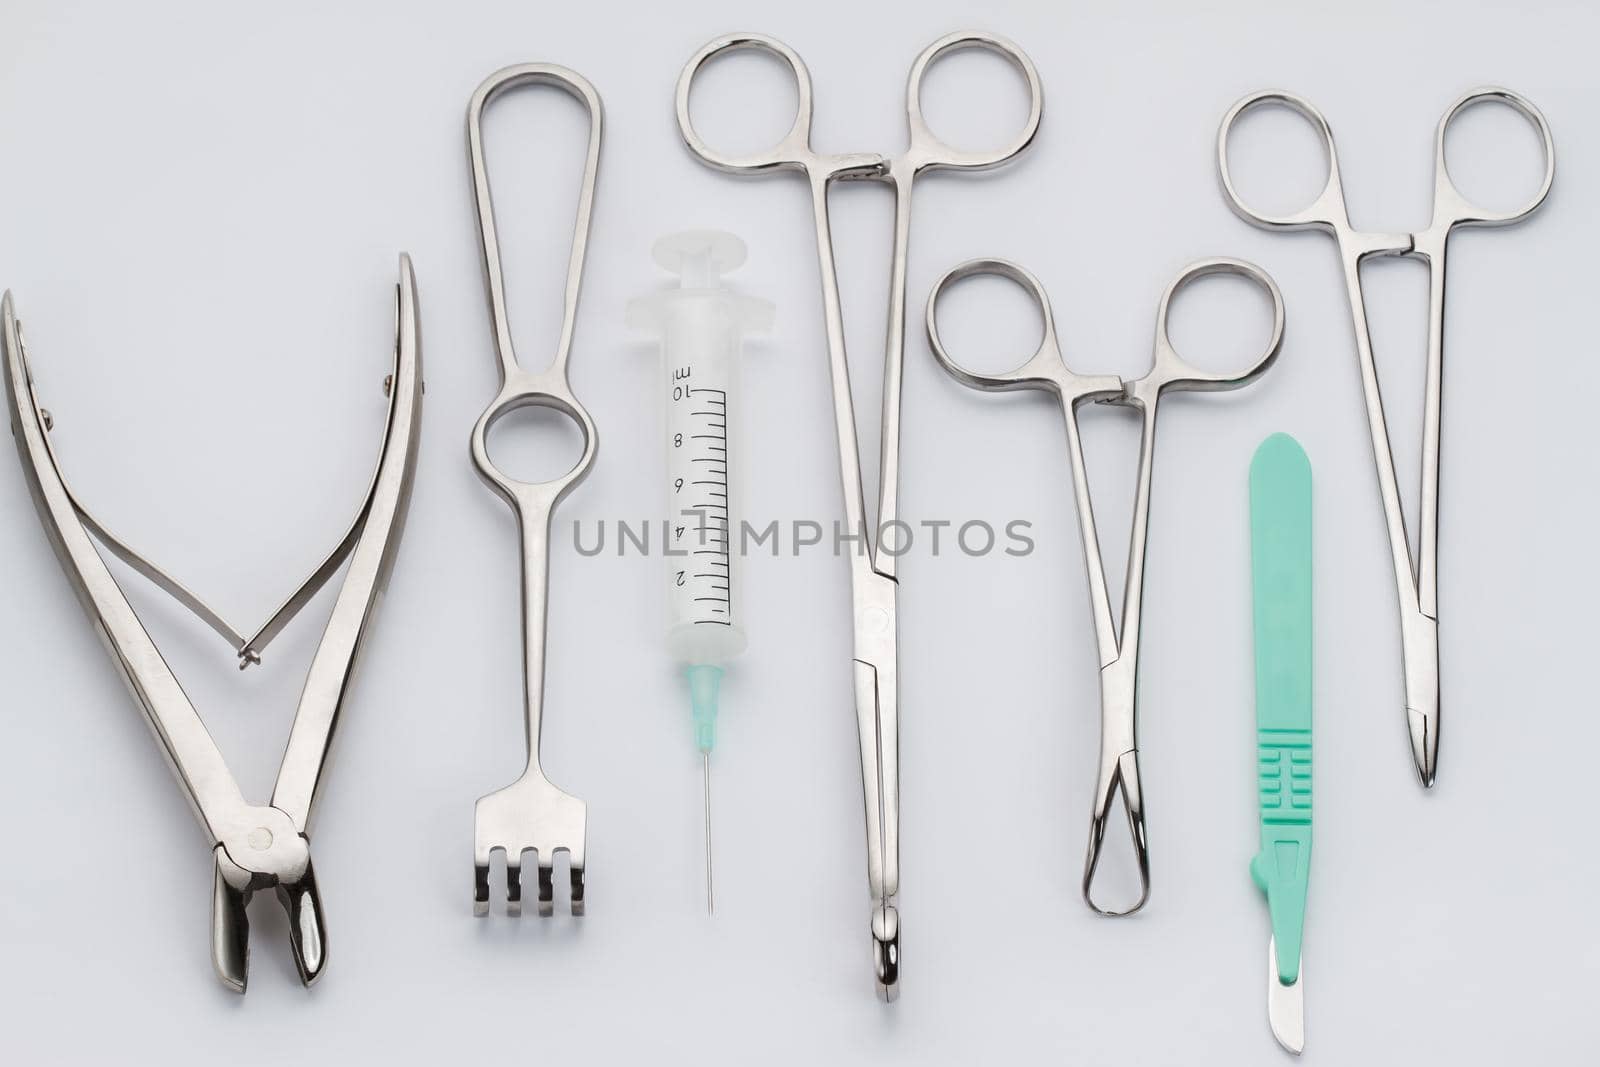 Overhead view of various surgical instruments - syringe, tongs etc.